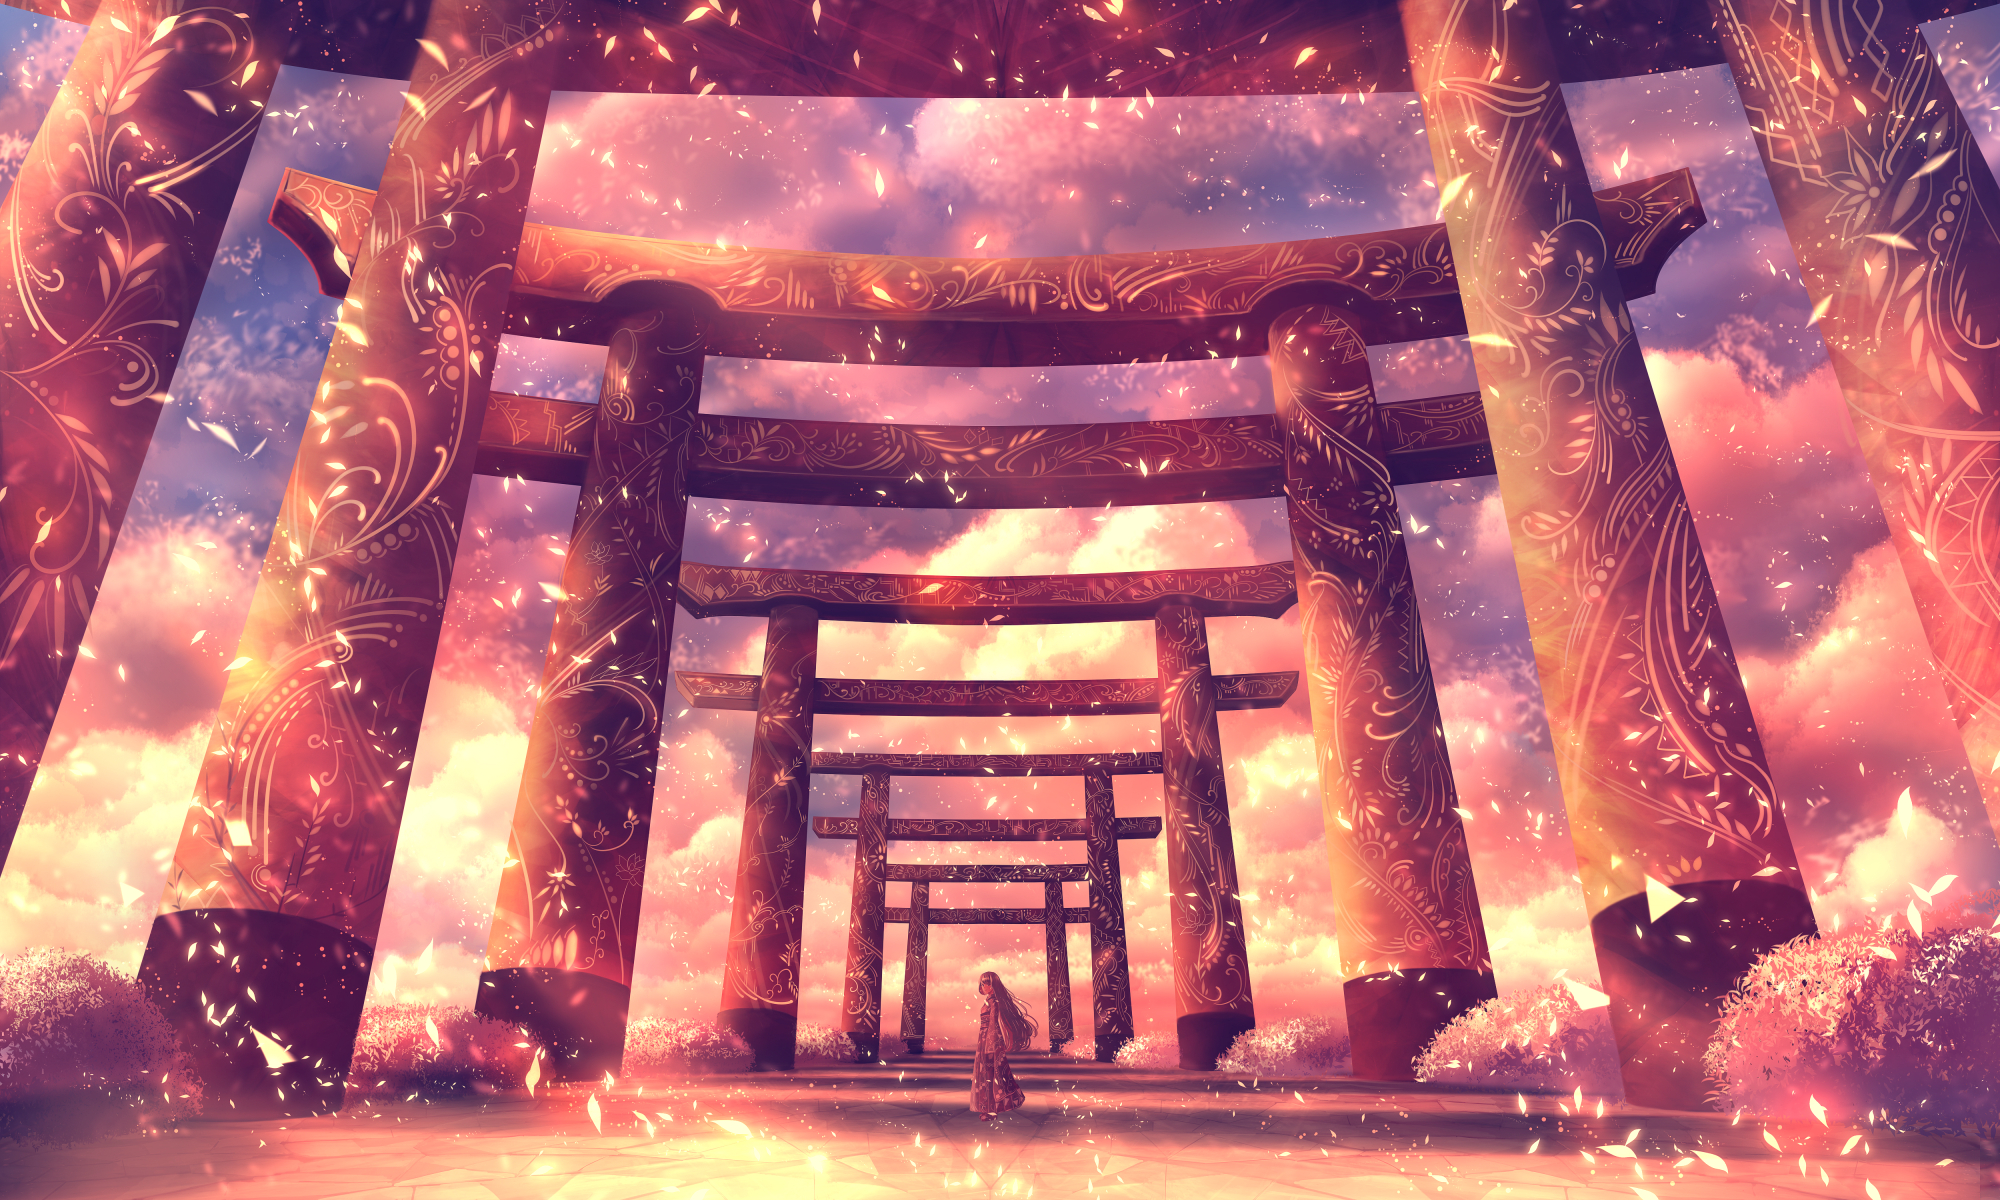 Free Vectors | Anime-style girl praying in front of the torii gate of a  shrine